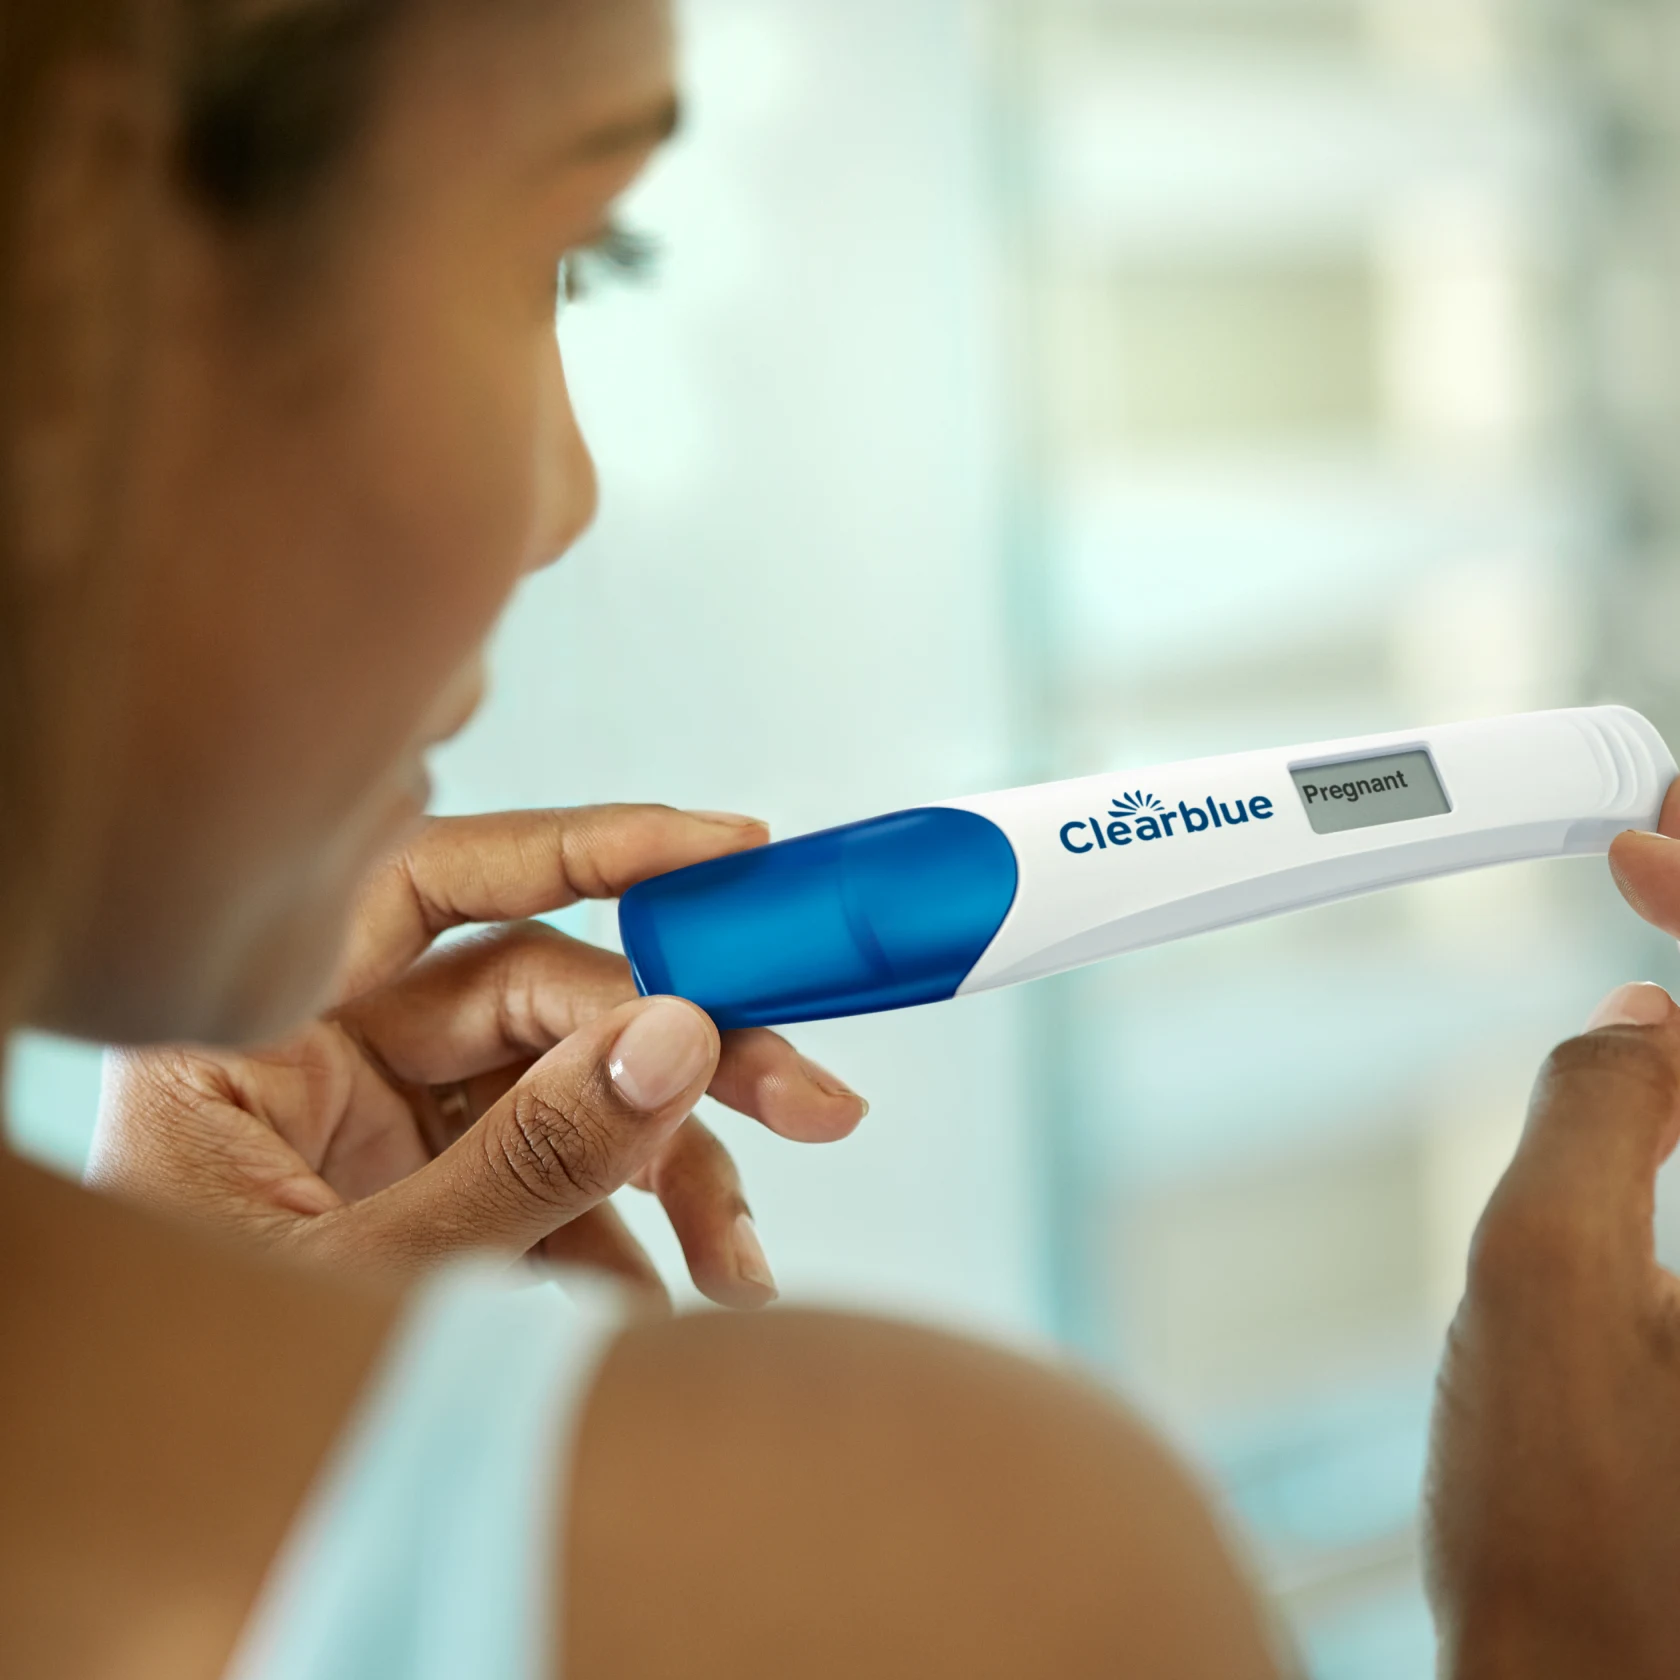 Women holds pregnancy test that reads "Pregnant" 